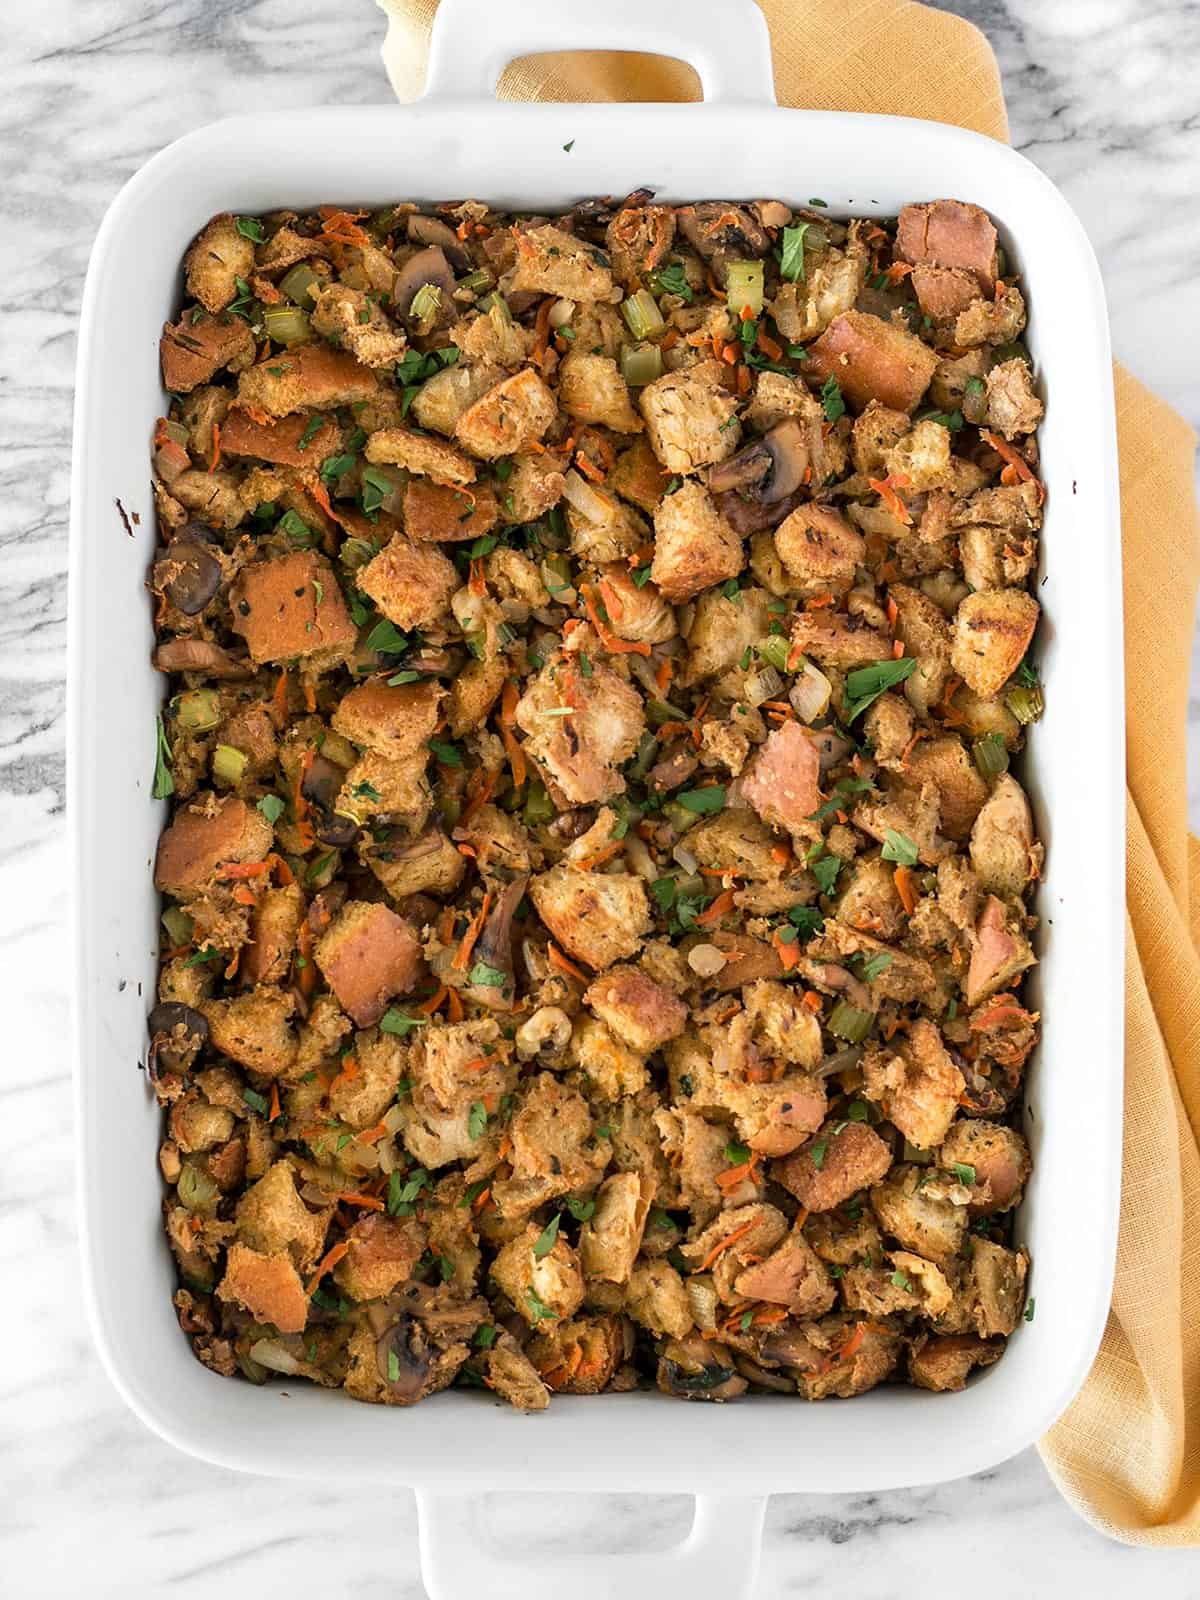 Overhead view of a casserole dish full of vegetarian stuffing.